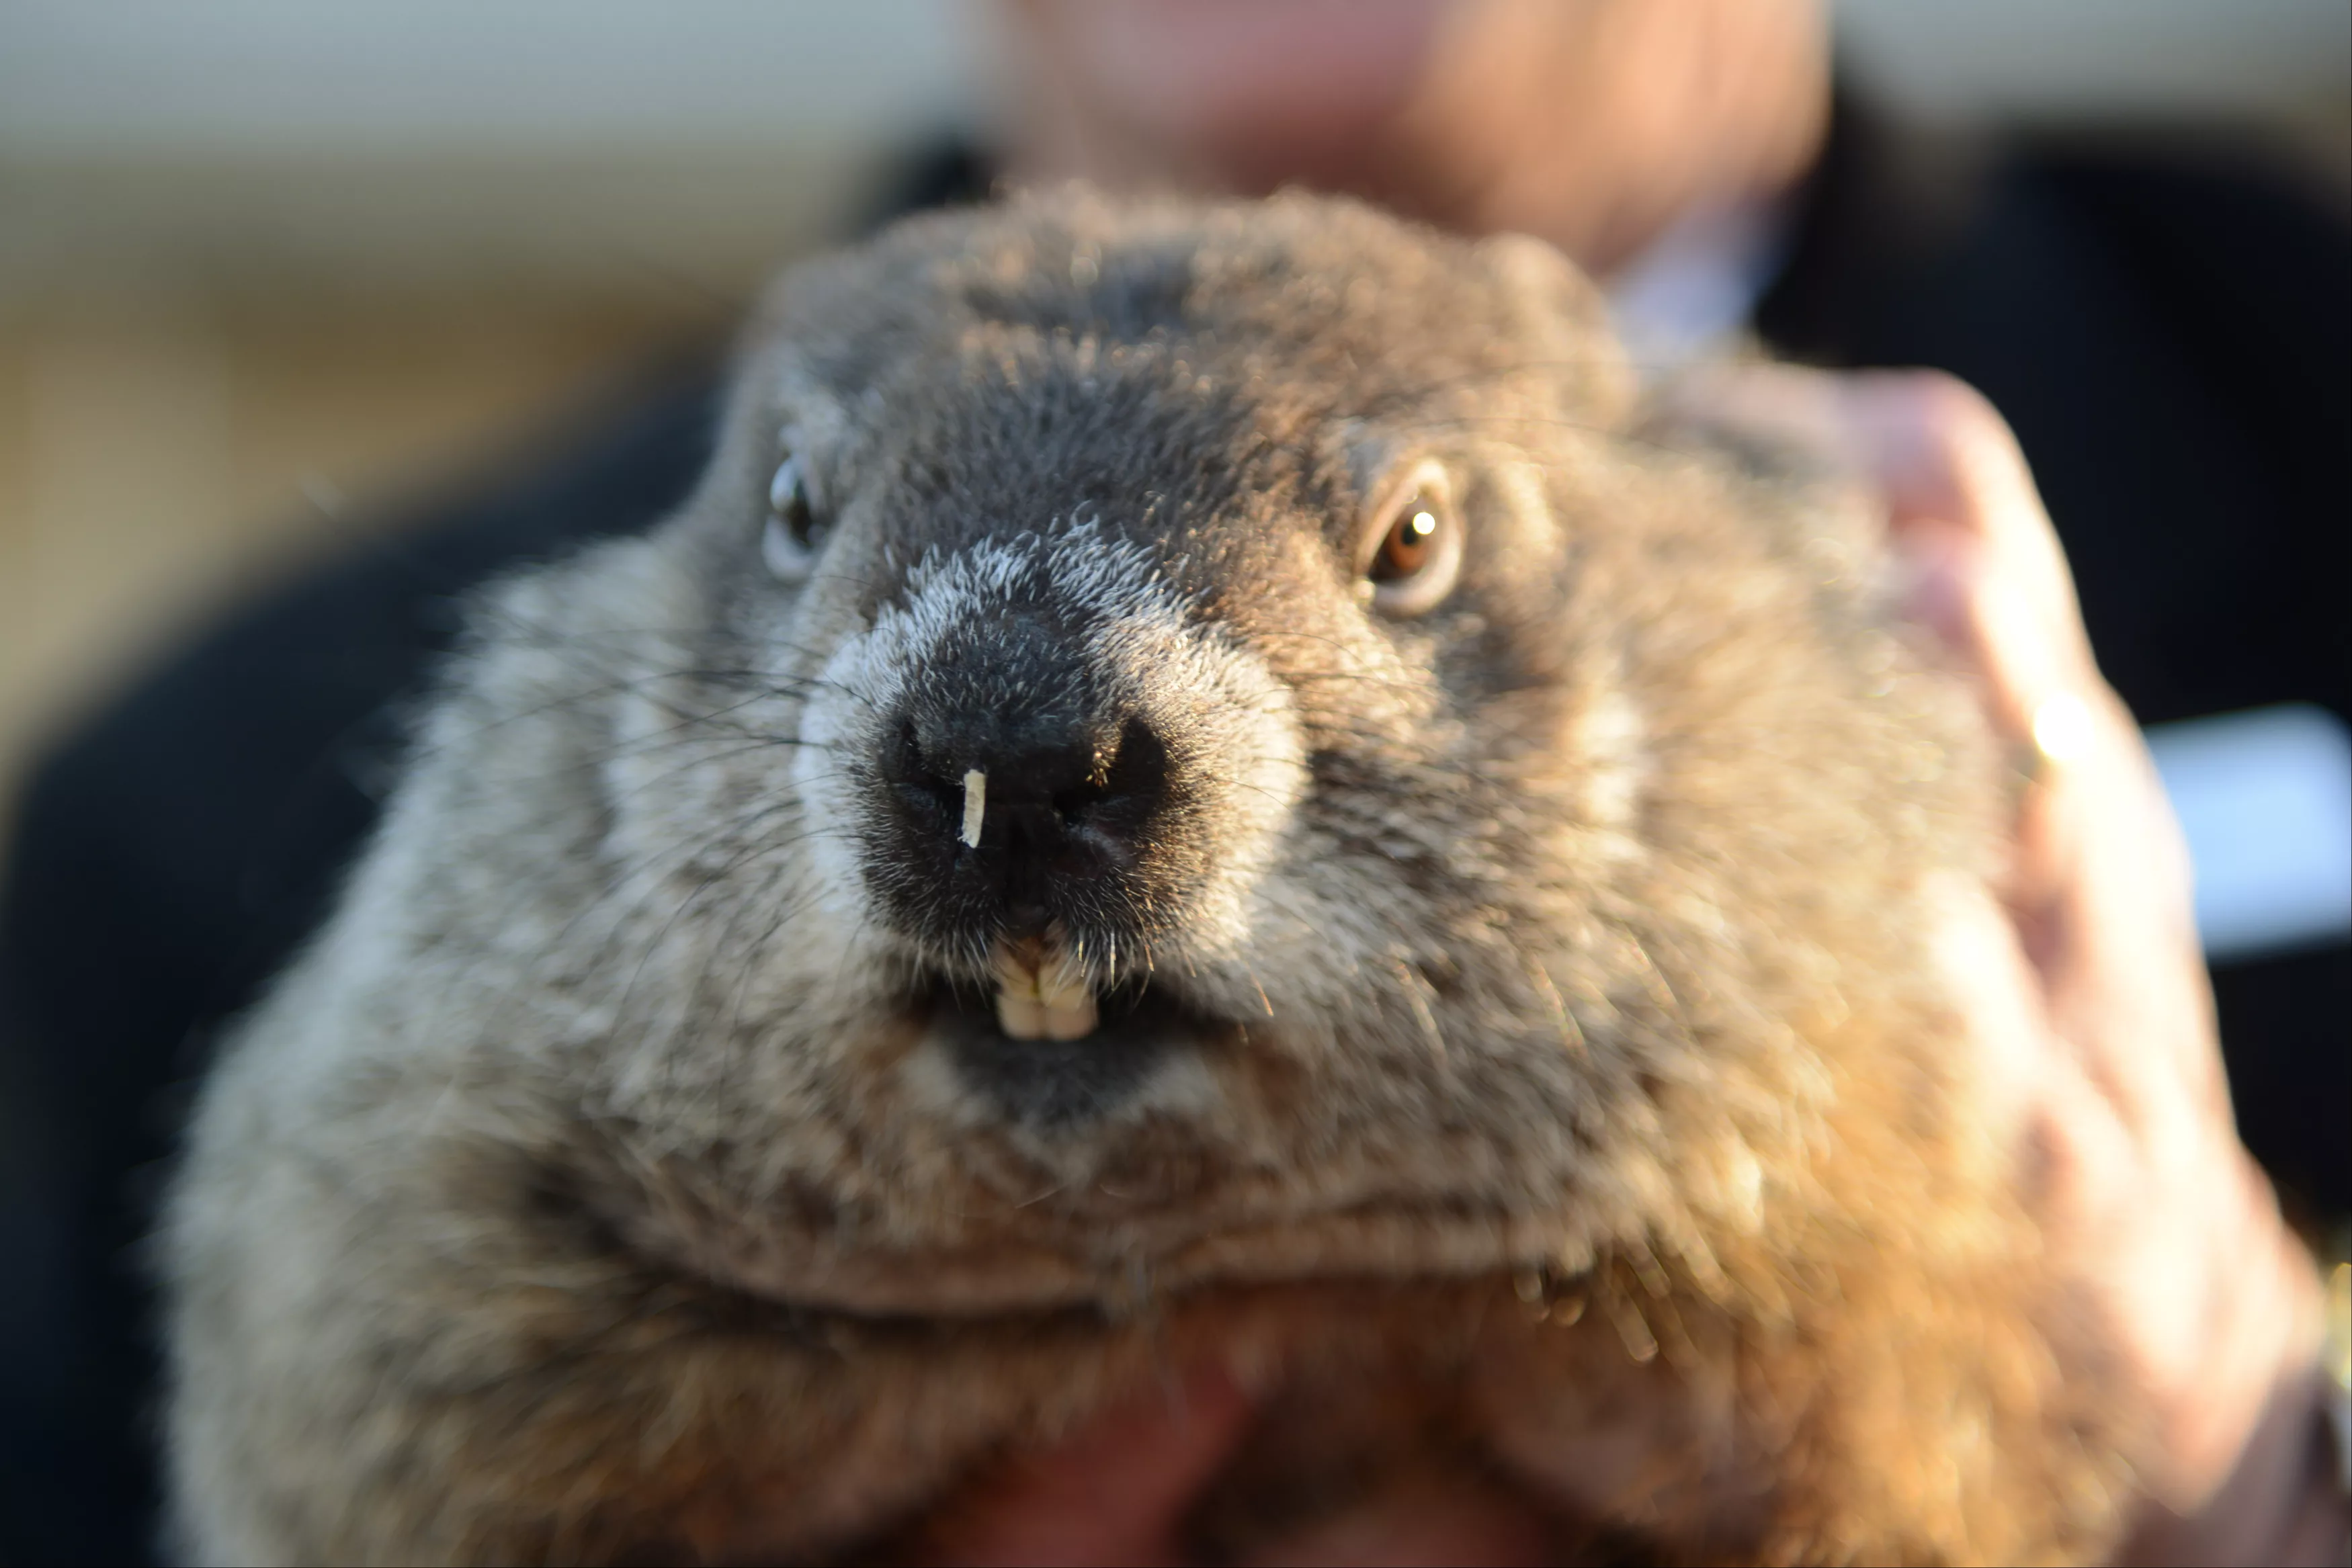 groundhog-co-handler-ploucha-holds-up-groundhog-punxsutawney-phil-after-phils-annual-weather-prediction-on-gobblers-knob-on-the-130th-groundhog-day-in-punxsutawney